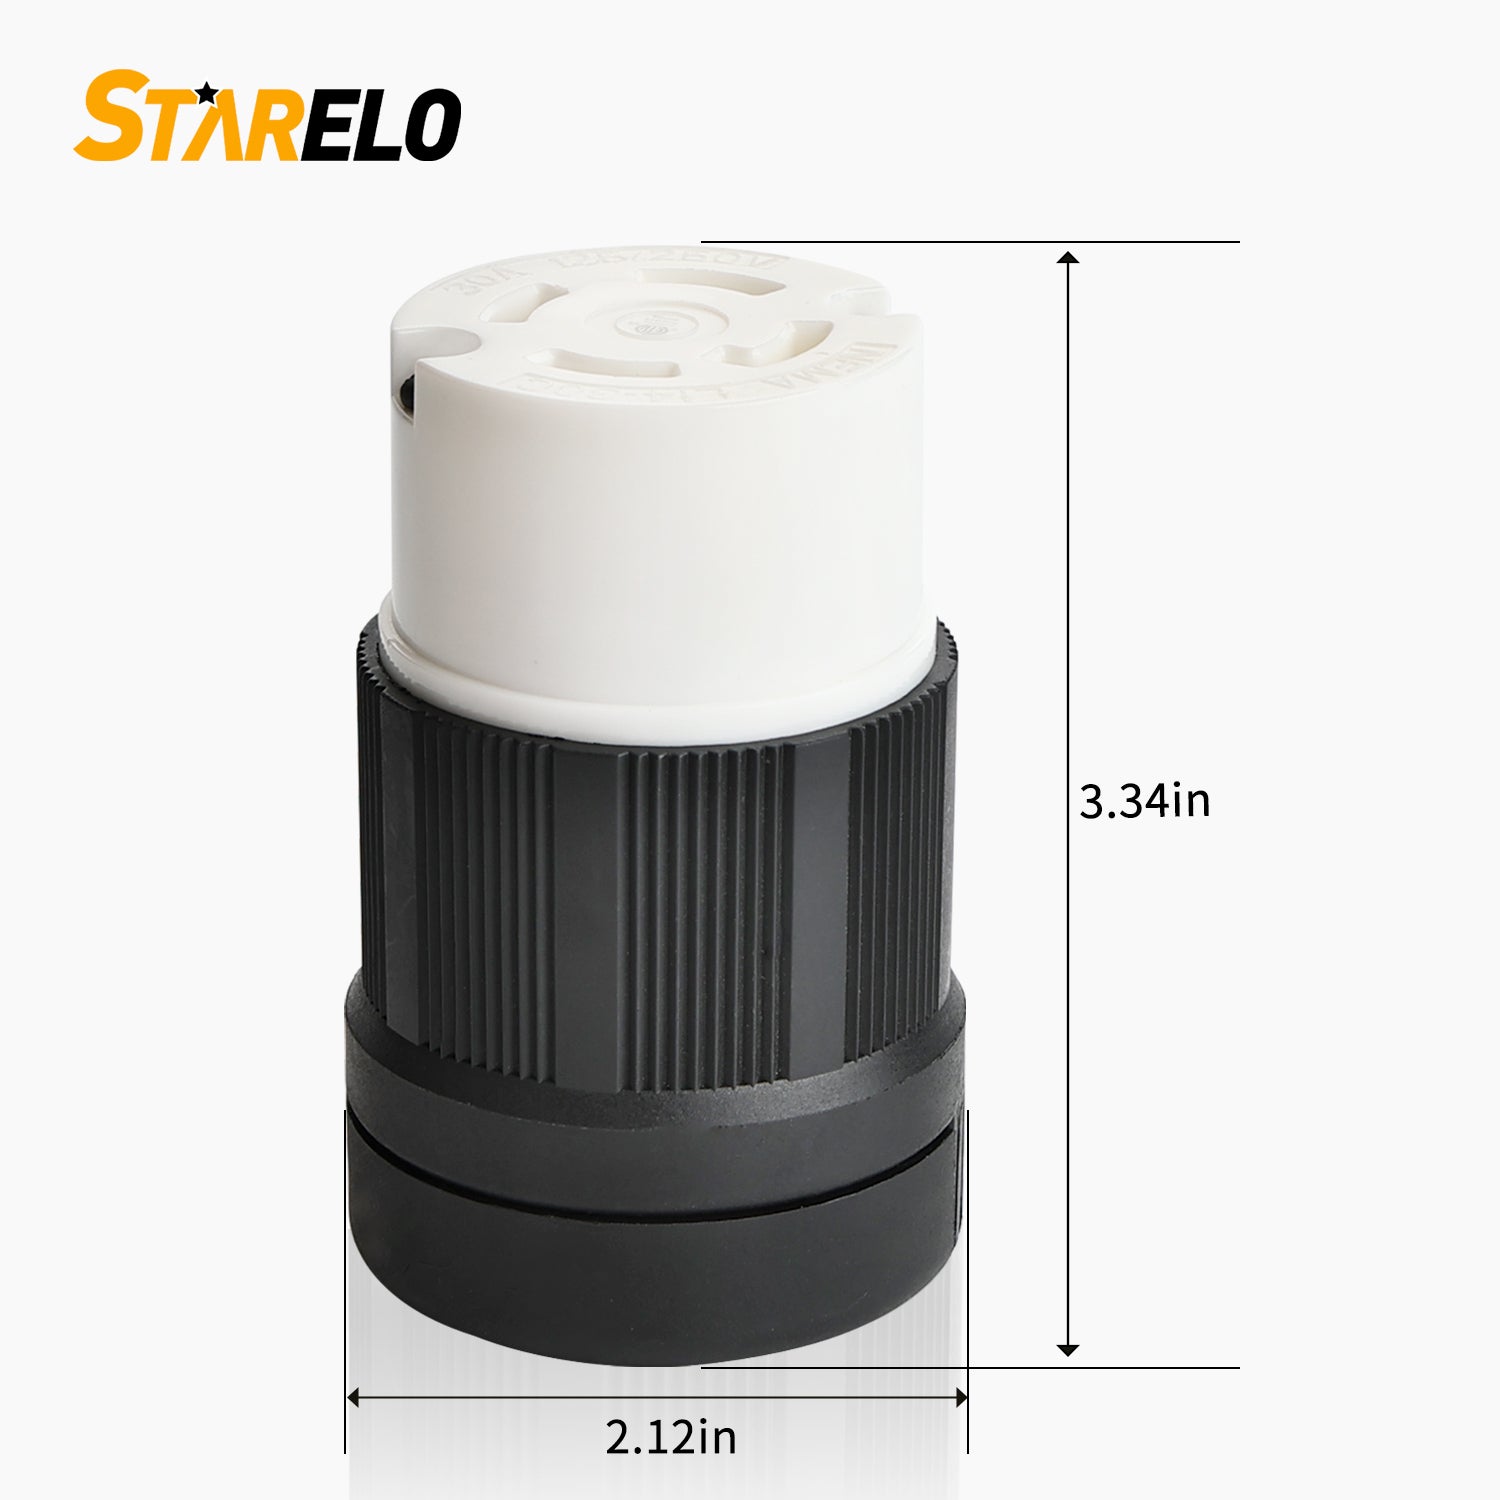 STARELO Locking Connector for Generator NEMA L14-30C Extension Cord End Female Connector 30A 125/250V 3 Pole 4 Wire Grounding Electrical Replacement Connector Industrial Grade ETL Listed.